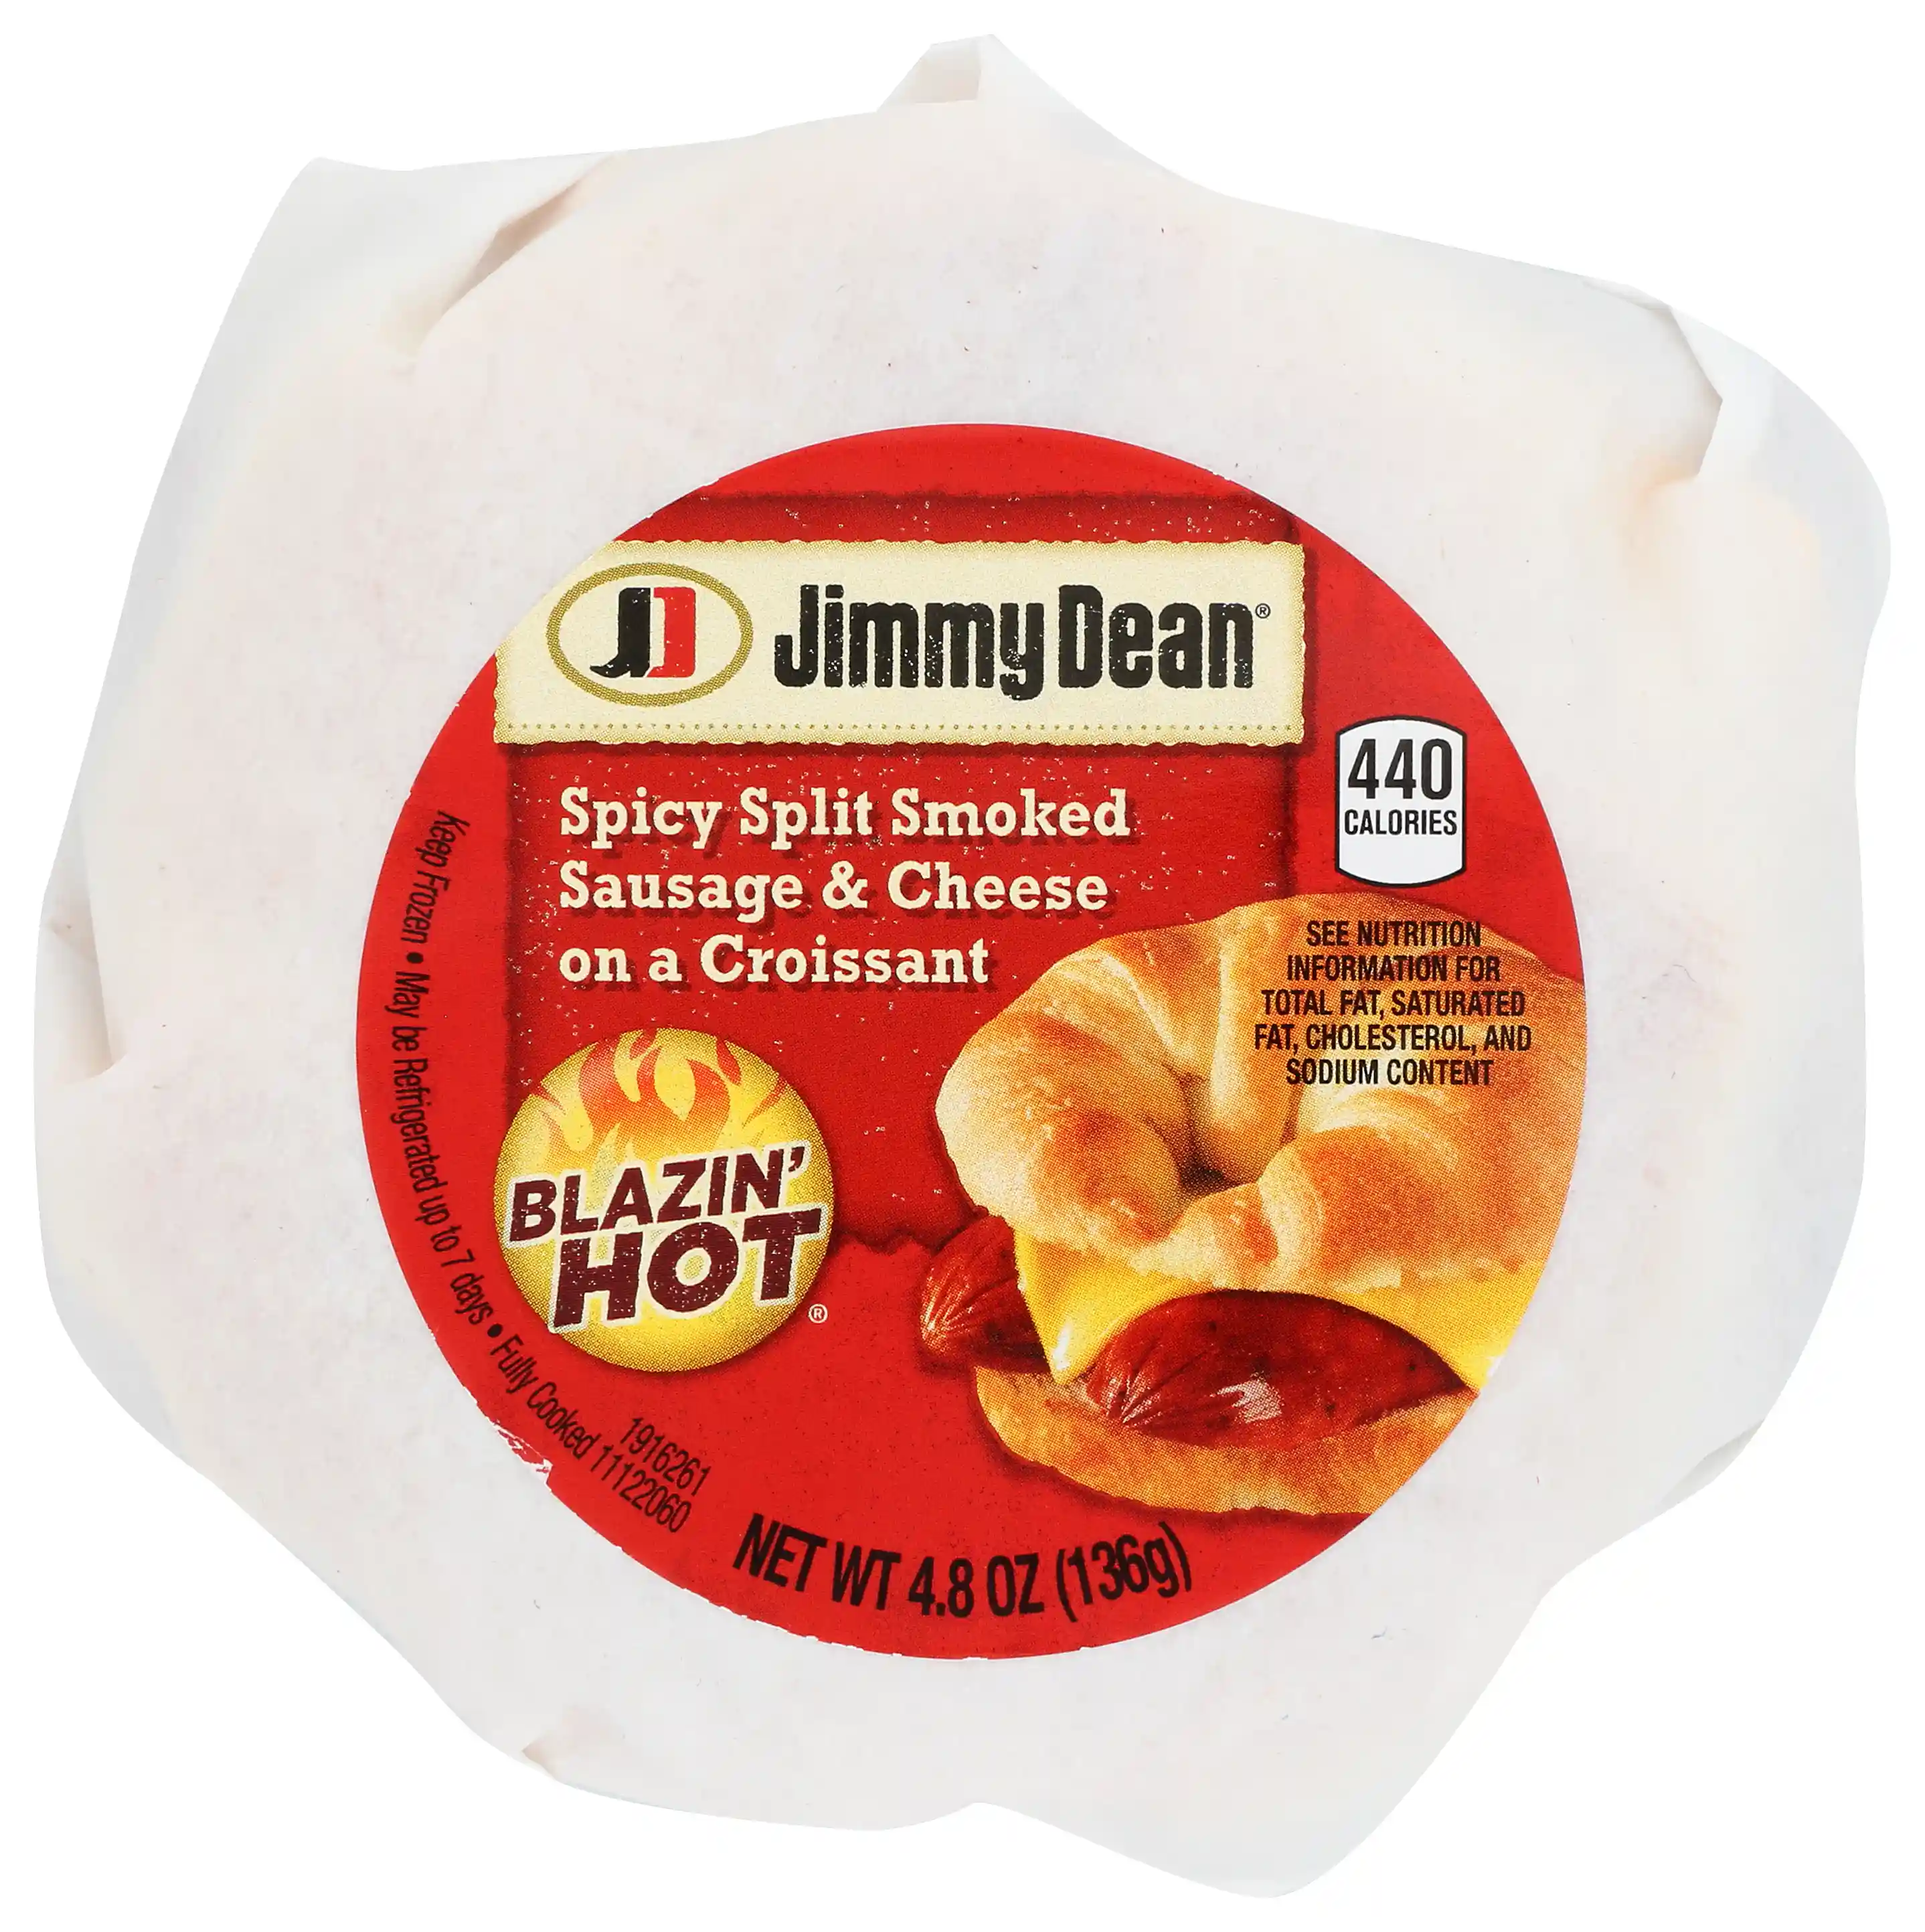 Jimmy Dean® Butcher Wrapped Blazin' Hot® Spicy Split Smoked Sausage & Cheese Croissant_image_31